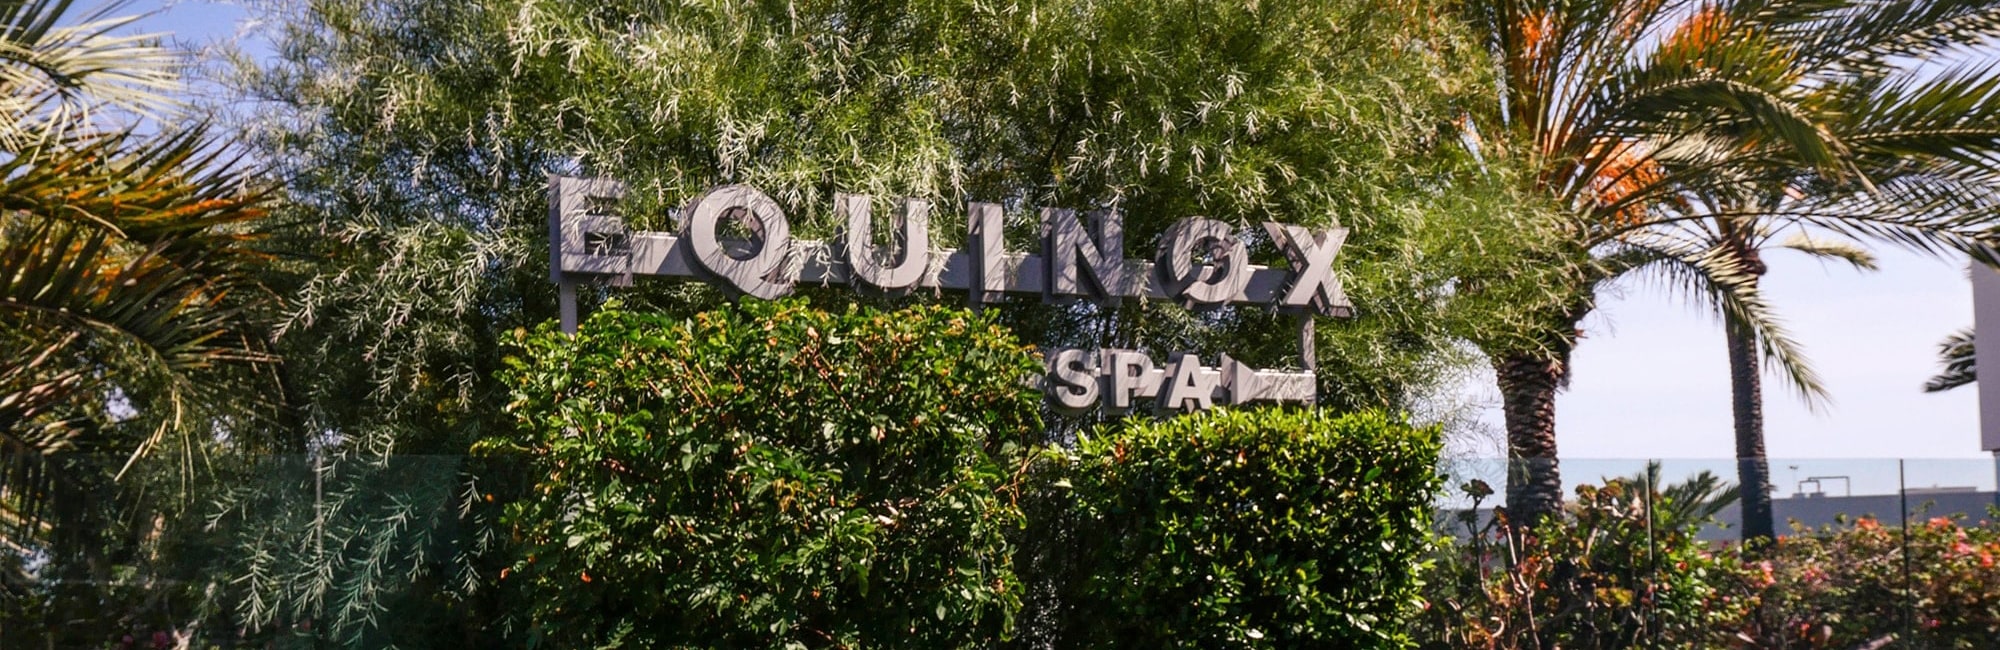 Equinox Spa Sign in Tree